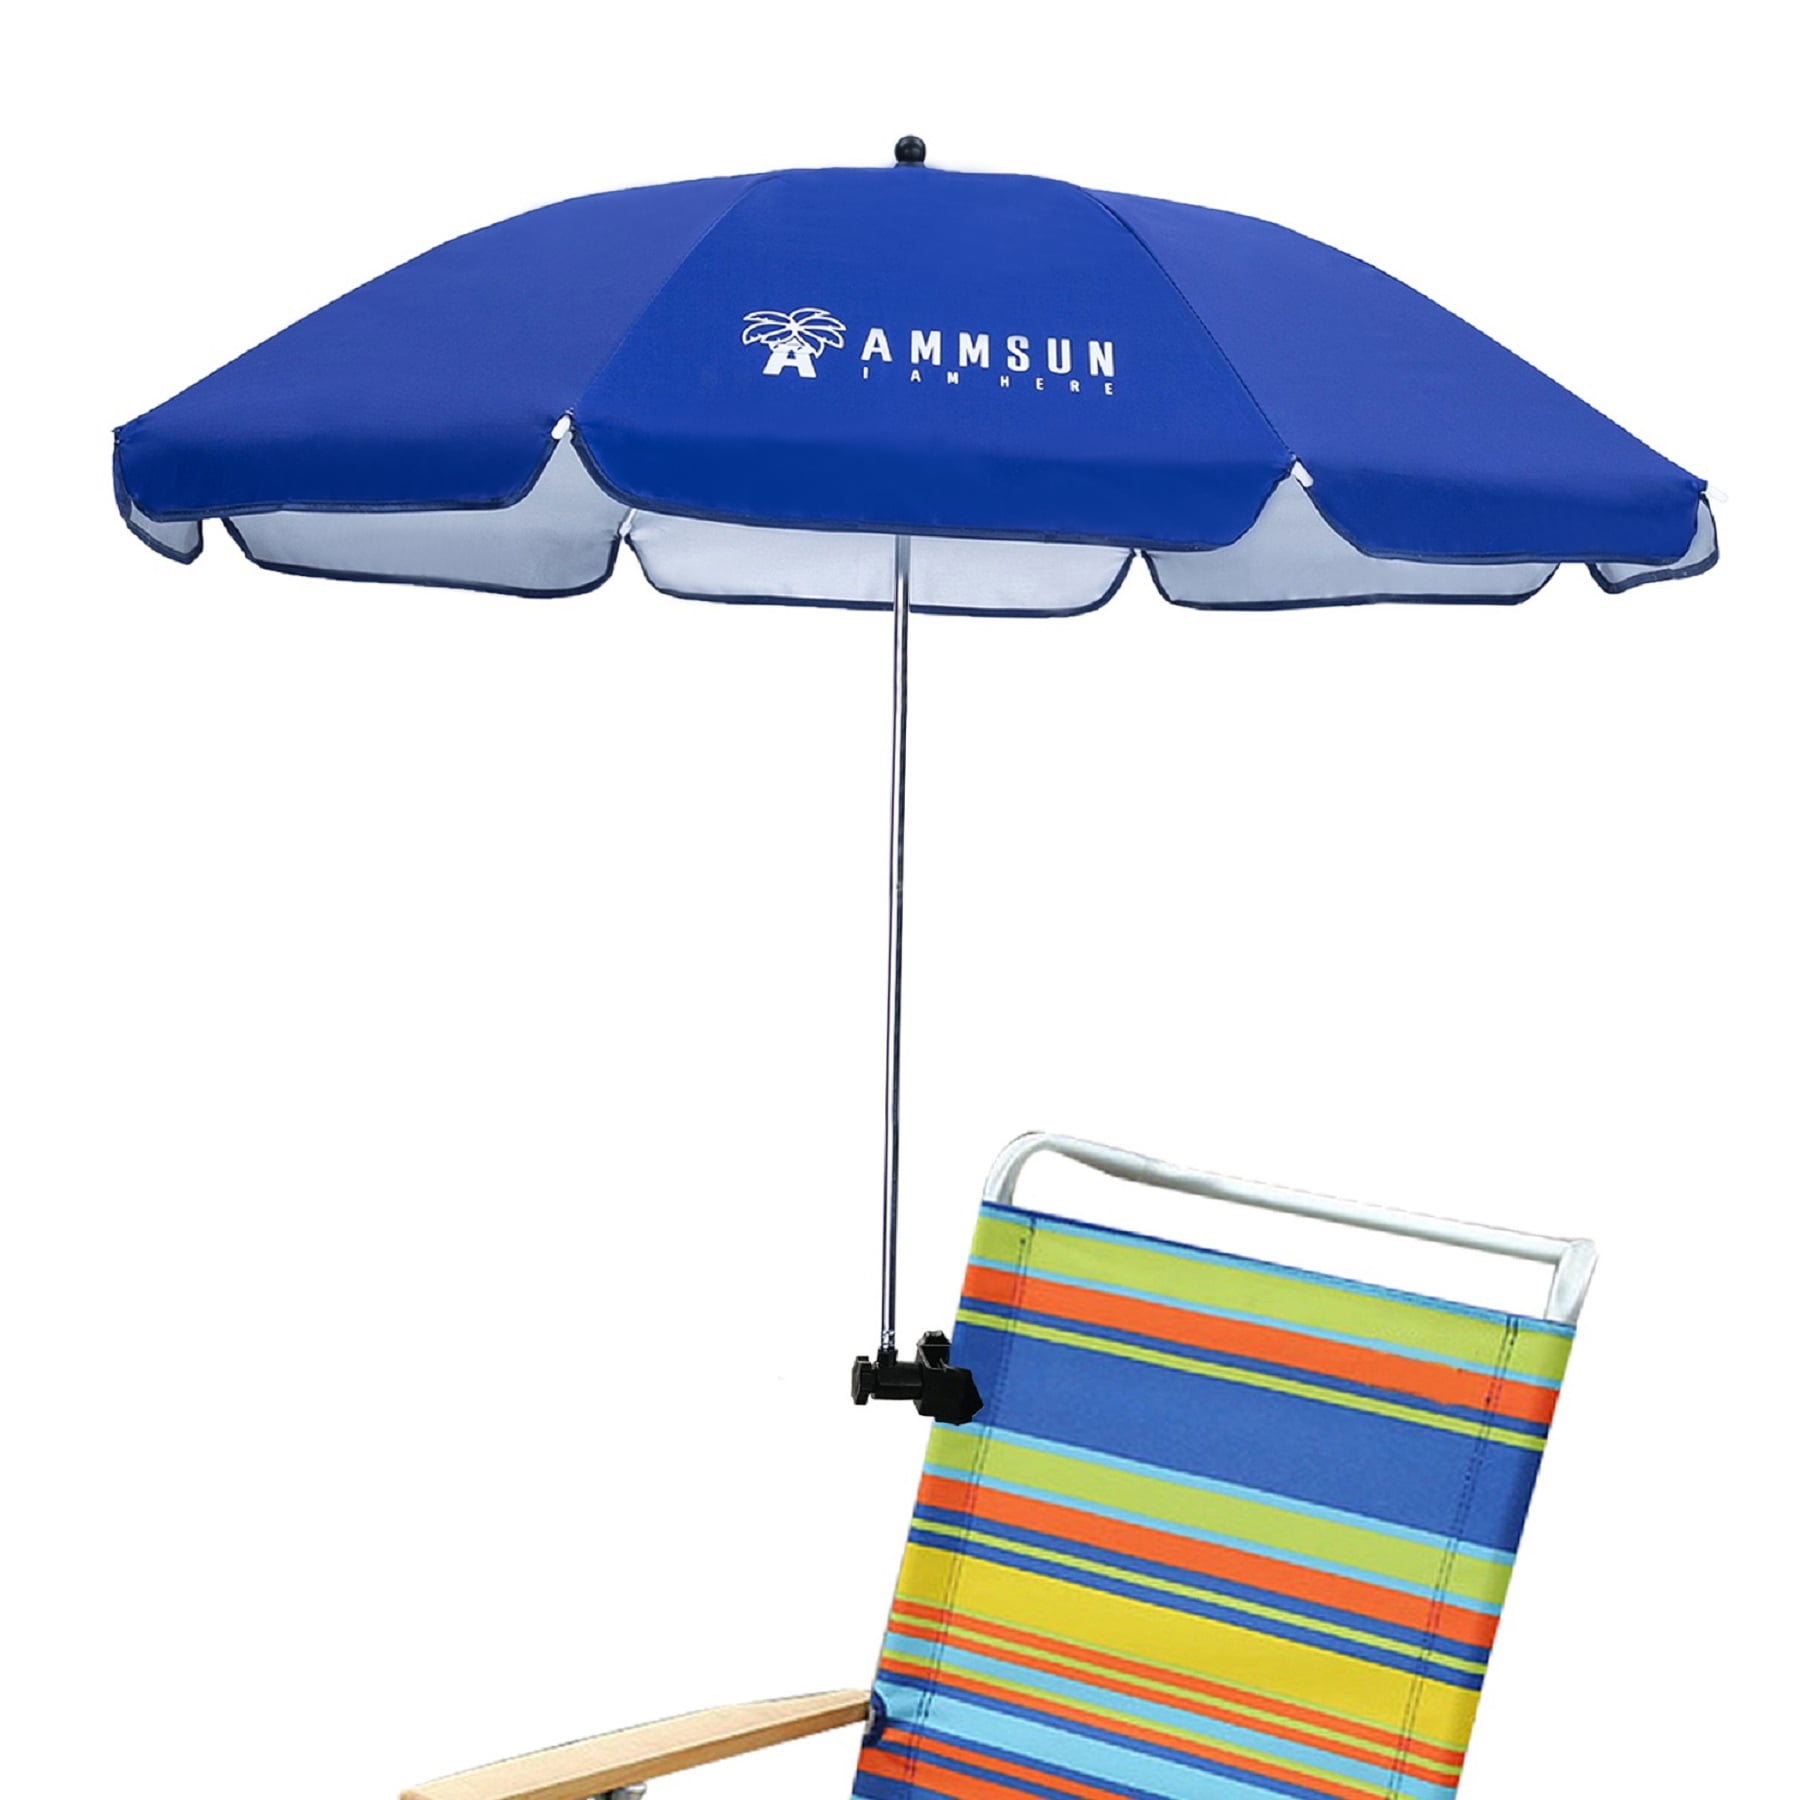 Chair Umbrella with Adjustable Clamp,UPF 50+,Shade Umbrella,Clip on Parasols for Patio,Beach,Strollers,Wheelchairs,Golf Carts 